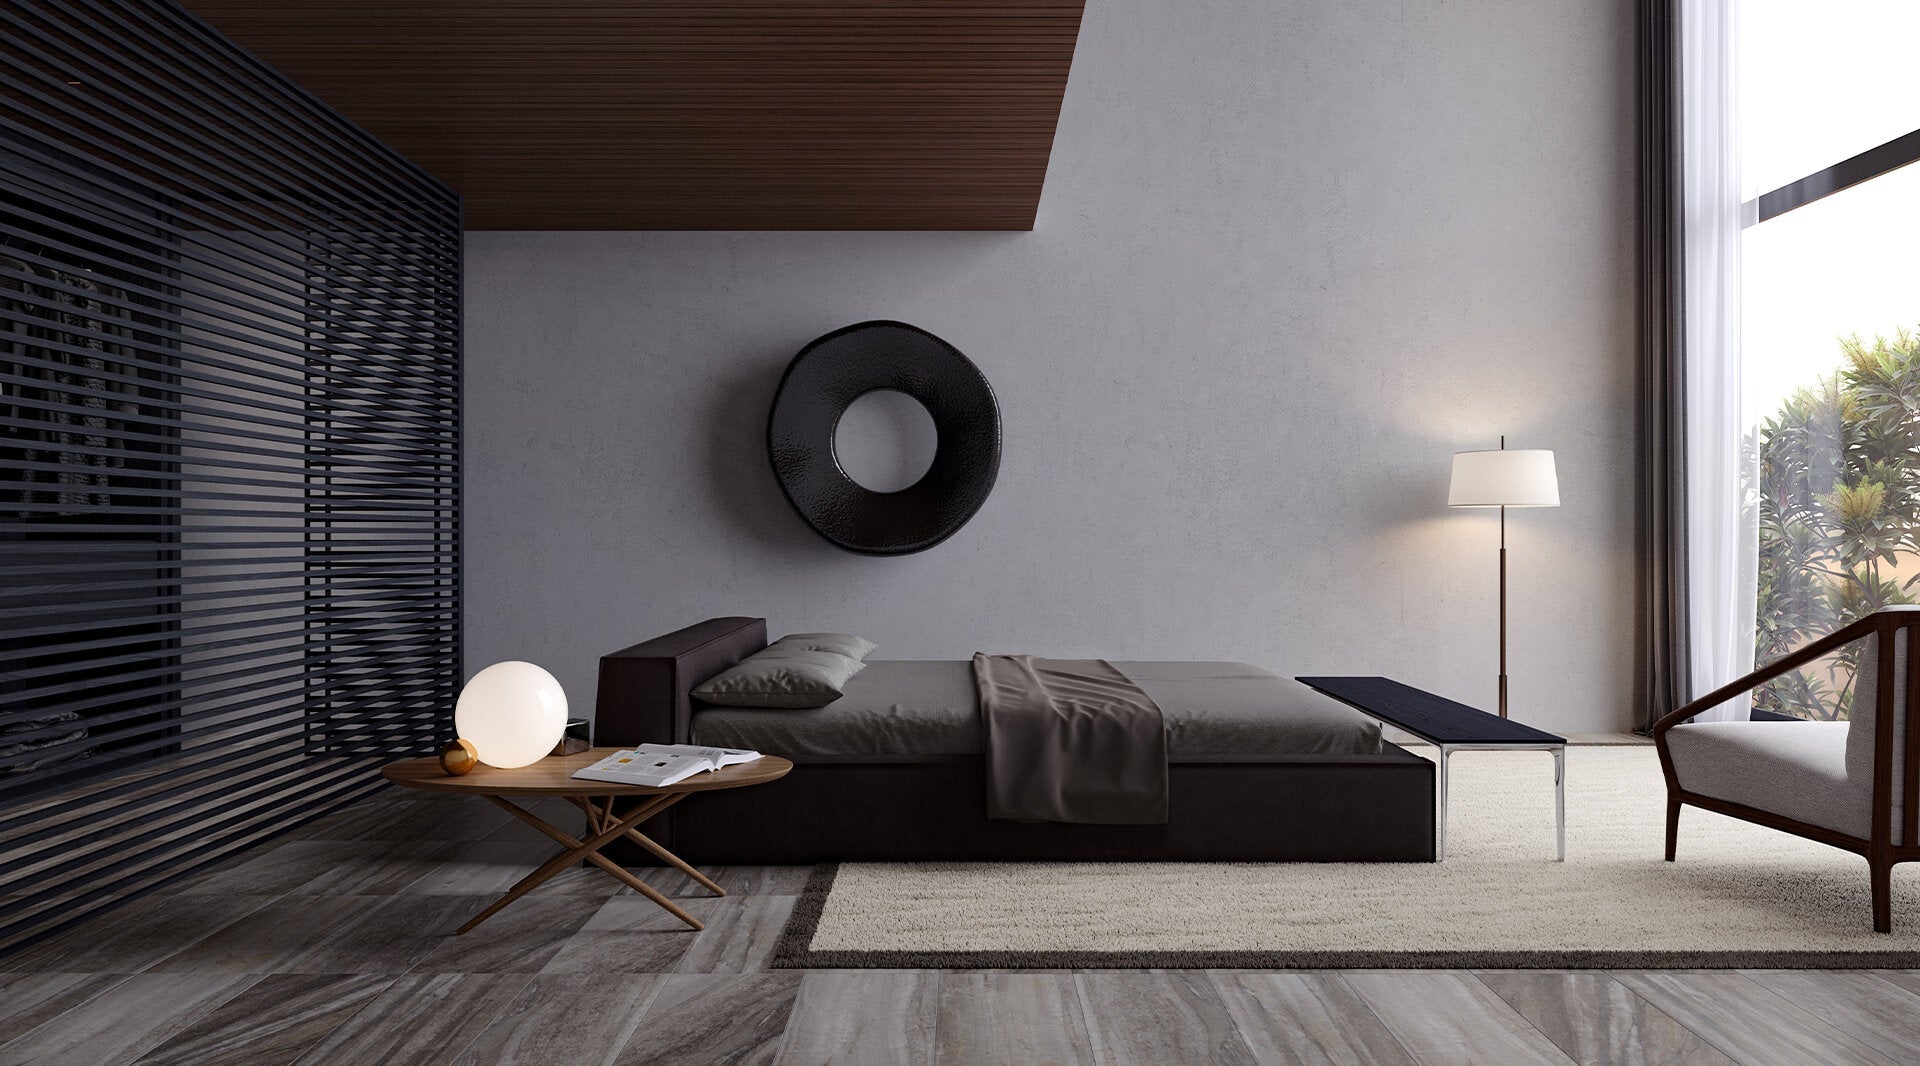 Modern minimalist bedroom interior showcasing Anatolia Form porcelain tile collection with sleek furniture and neutral color palette.